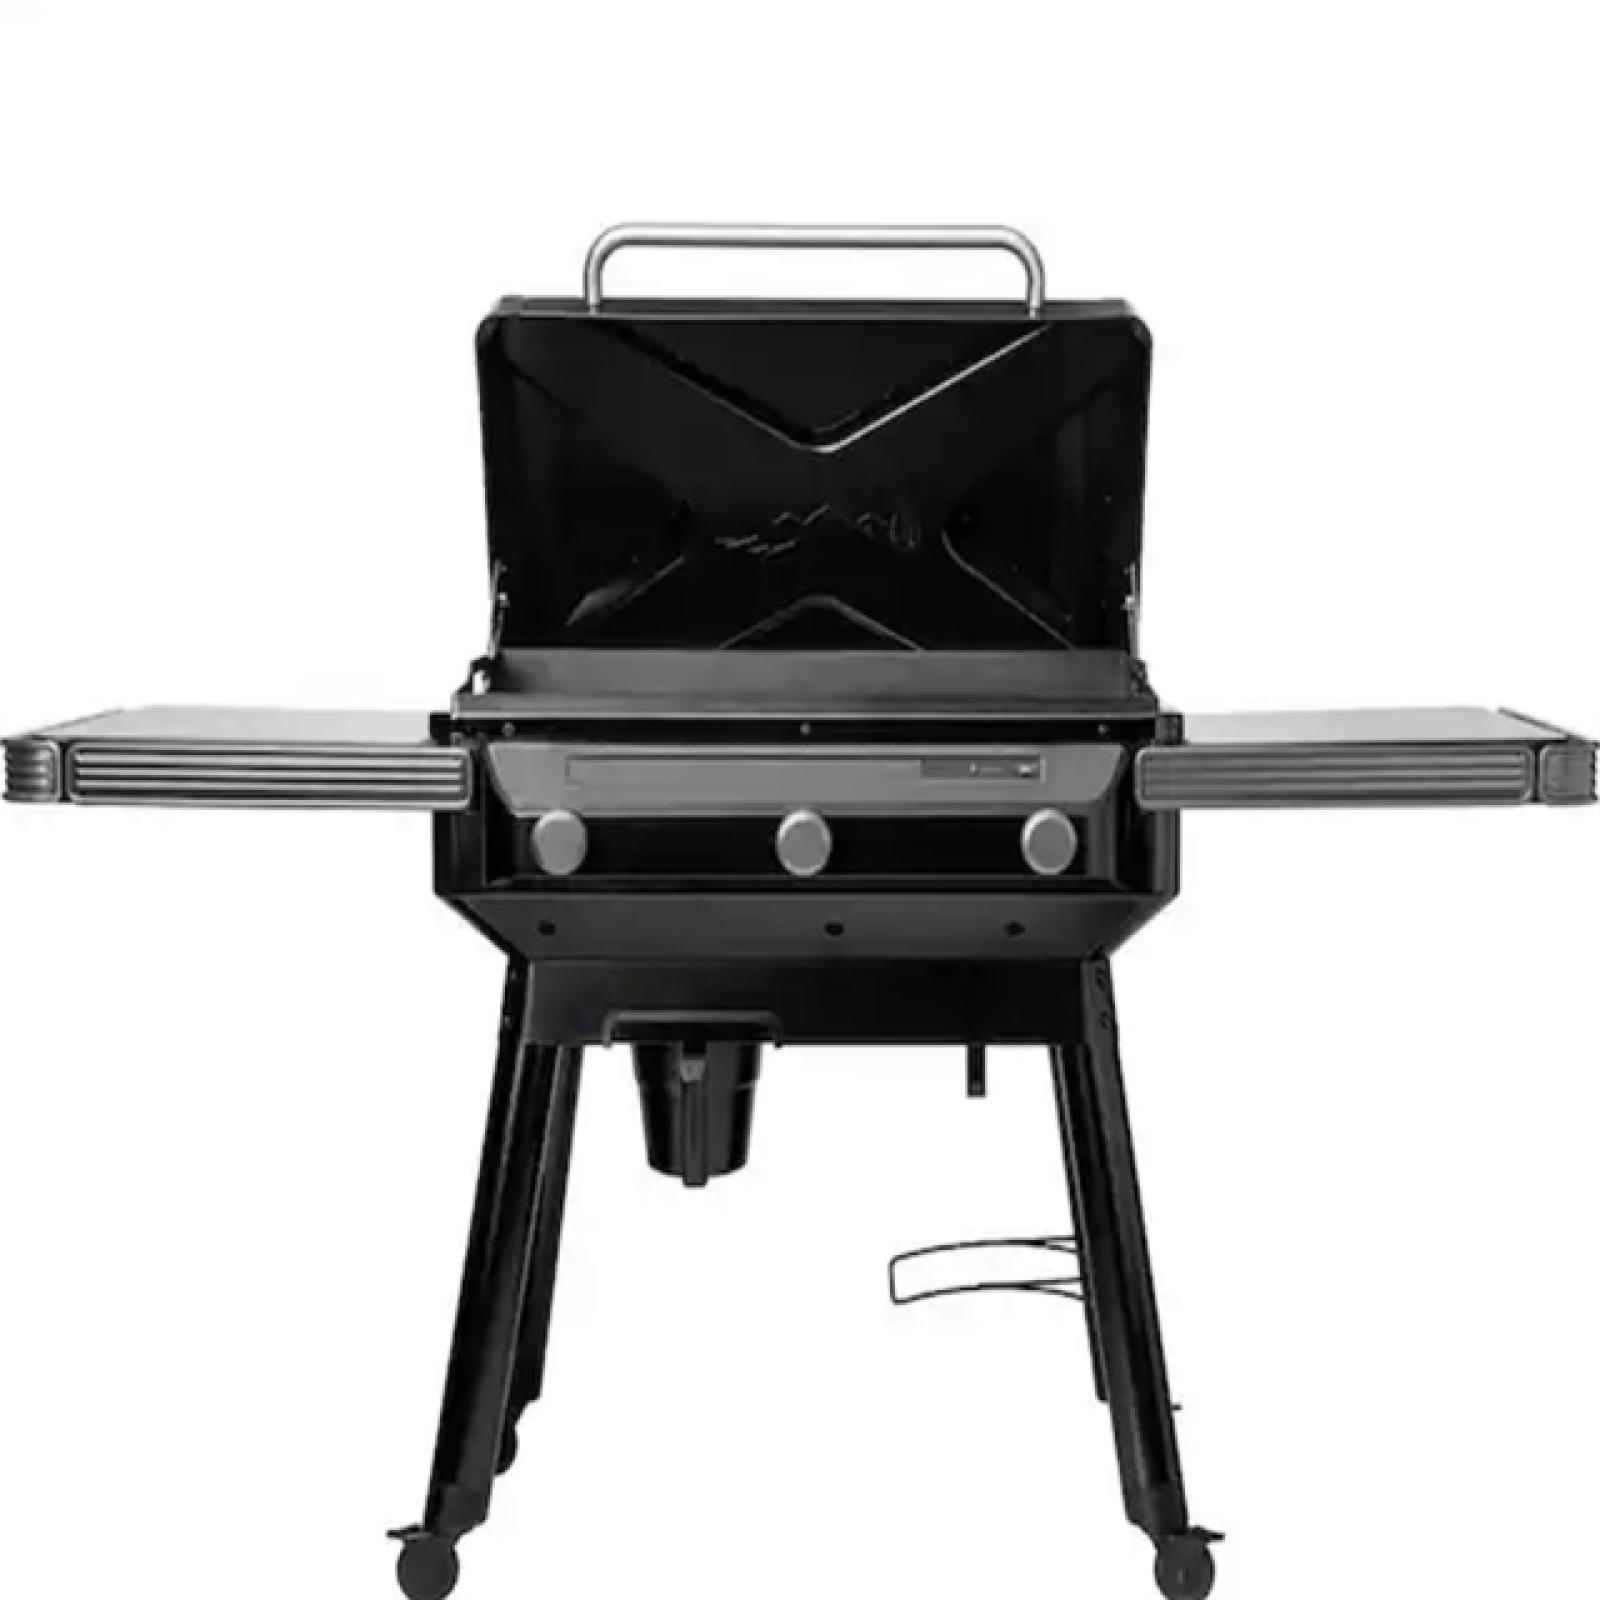 DALLAS LOCATION - NEW! Traeger Flatrock 3 Cooking Zone 594 sq in. Flat Top Propane Griddle in Black